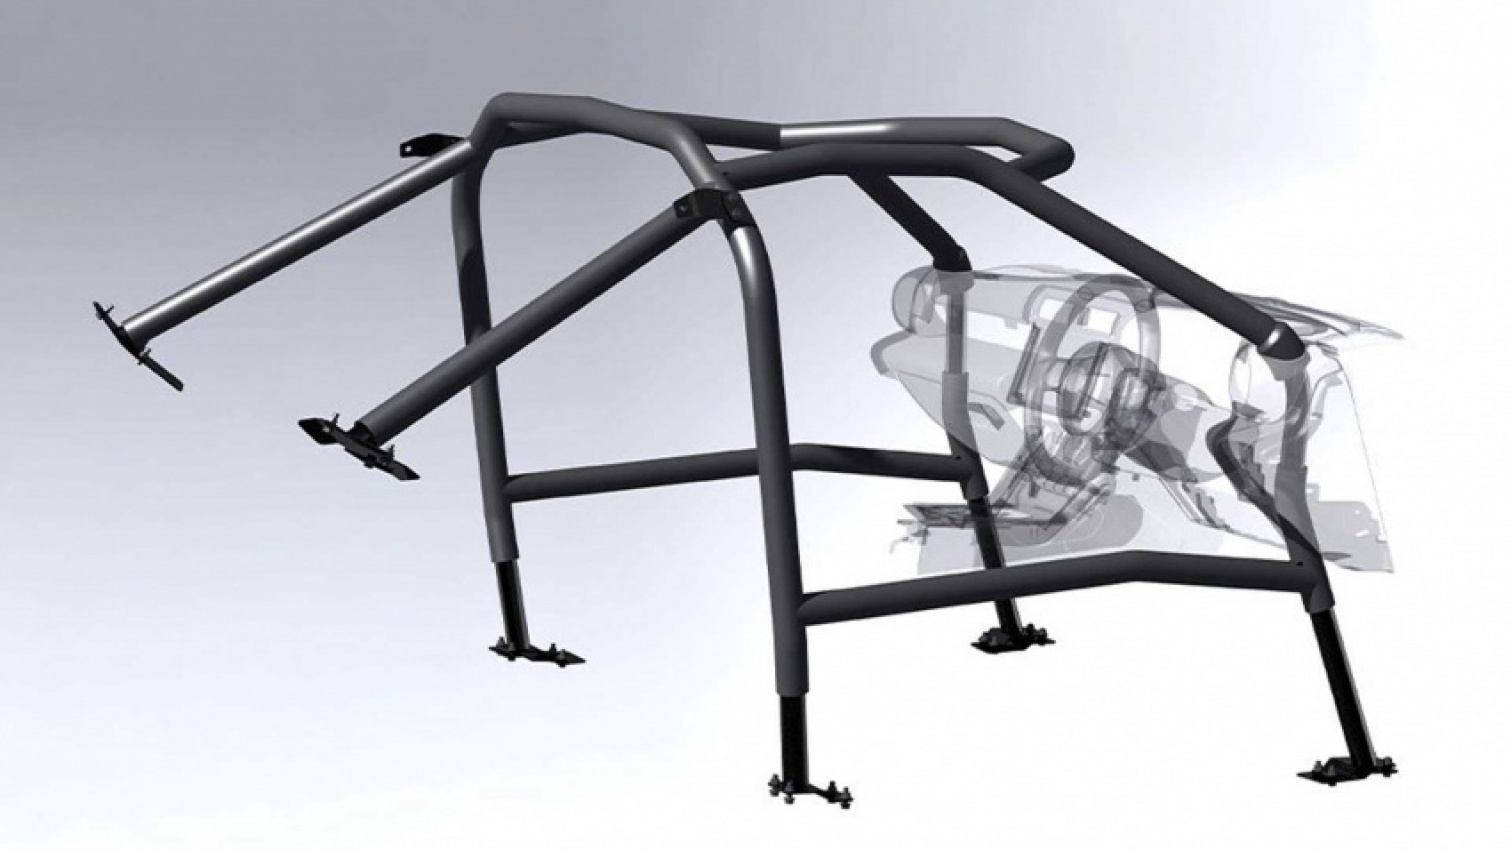 autos, cars, subaru, toyota, subaru brz, toyota gr86, subaru brz now offer factory race package with stripped interior and a cage